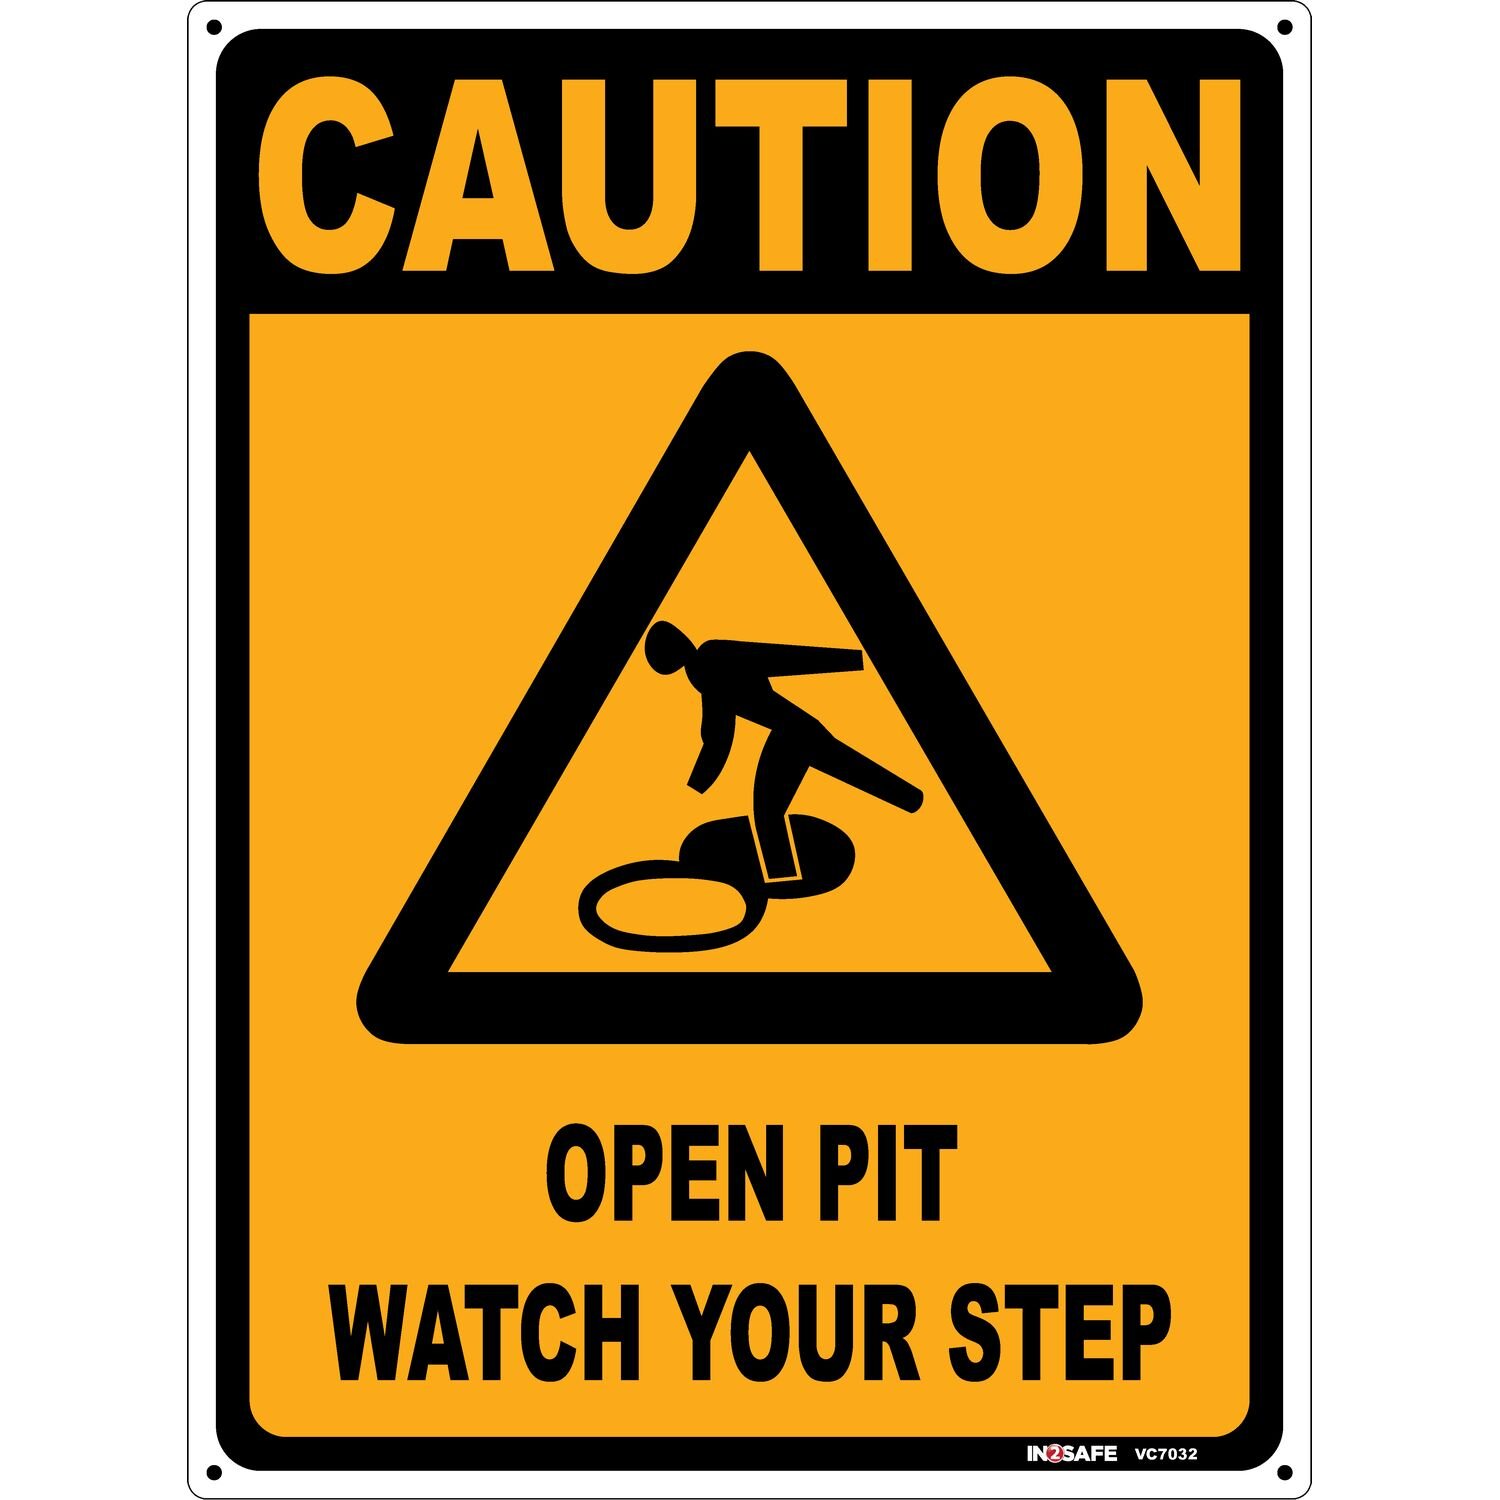 CAUTION Open Pit Watch Your Step